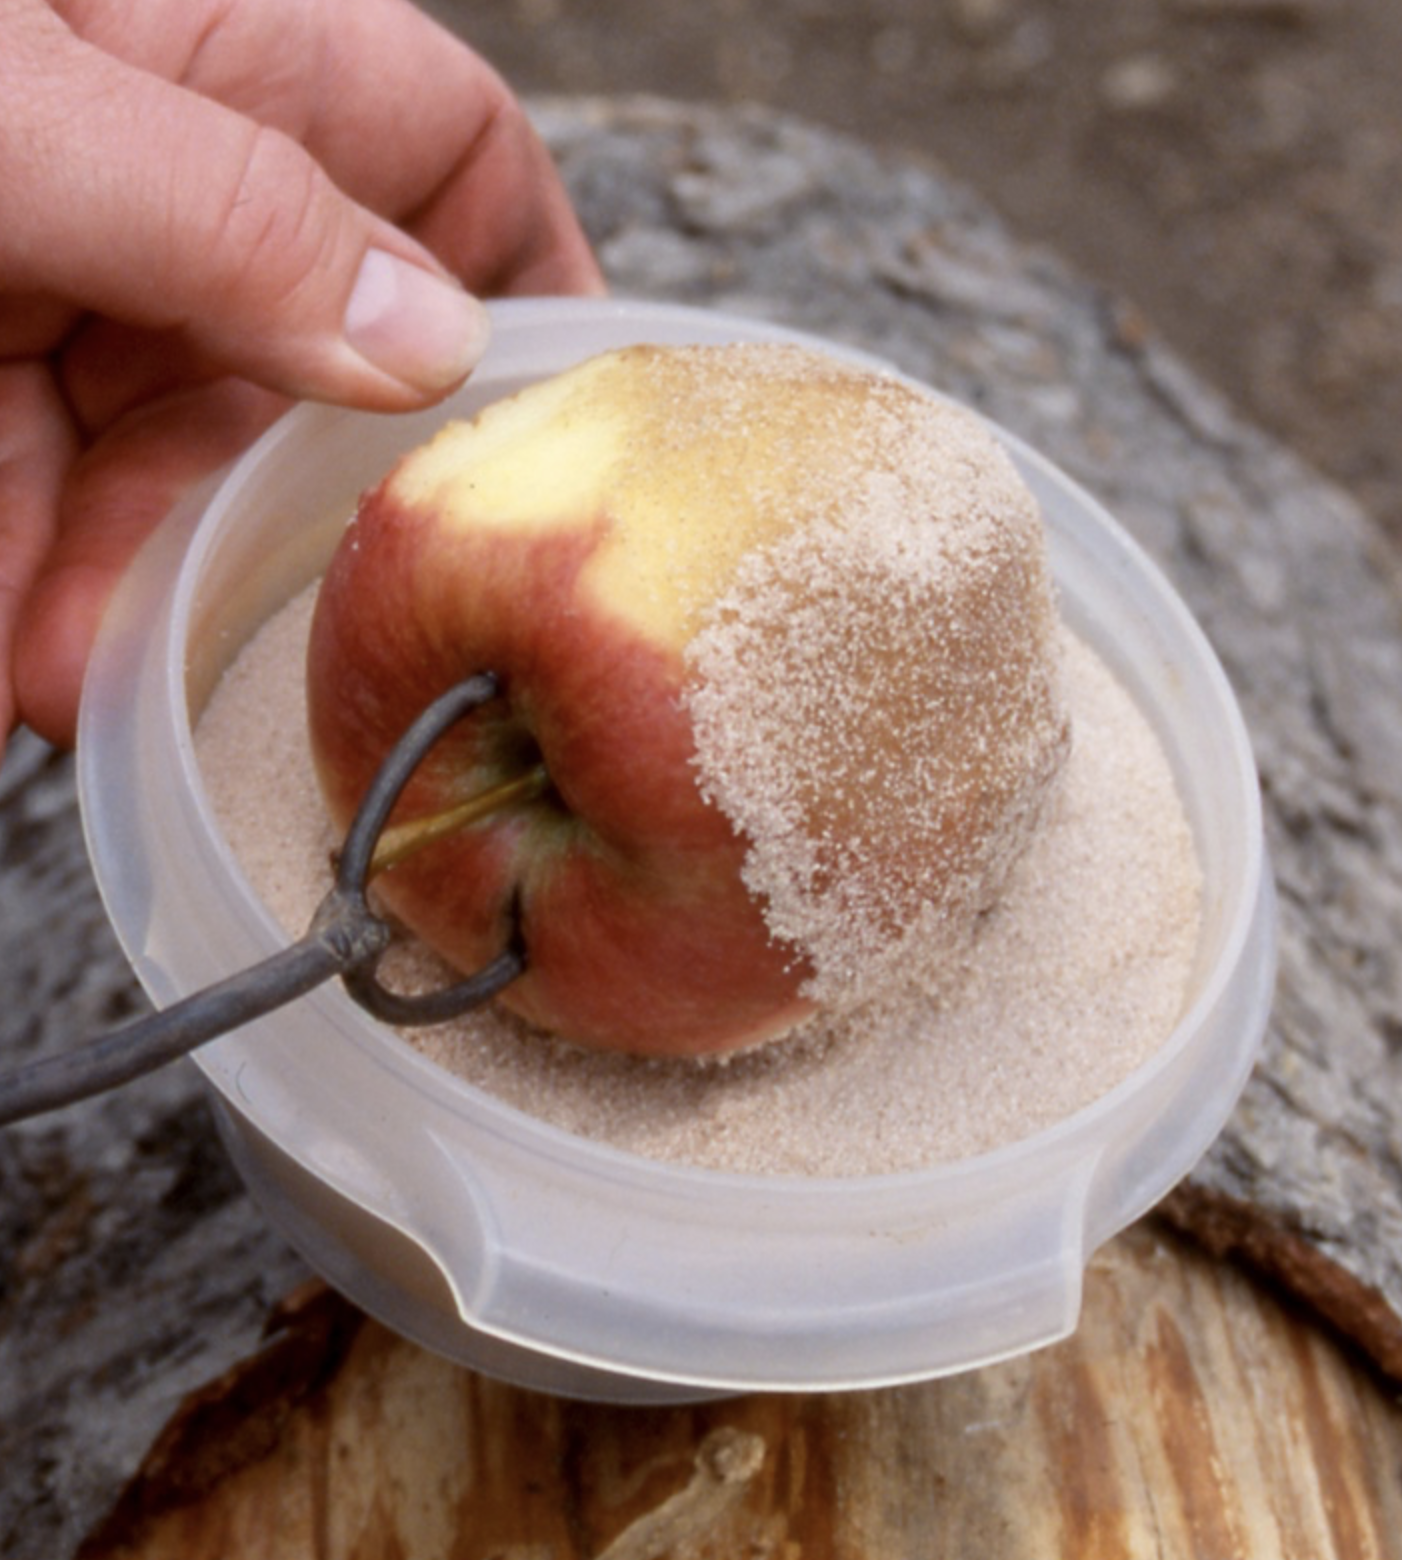 Apple pie on a stick is a delicious camping treat!